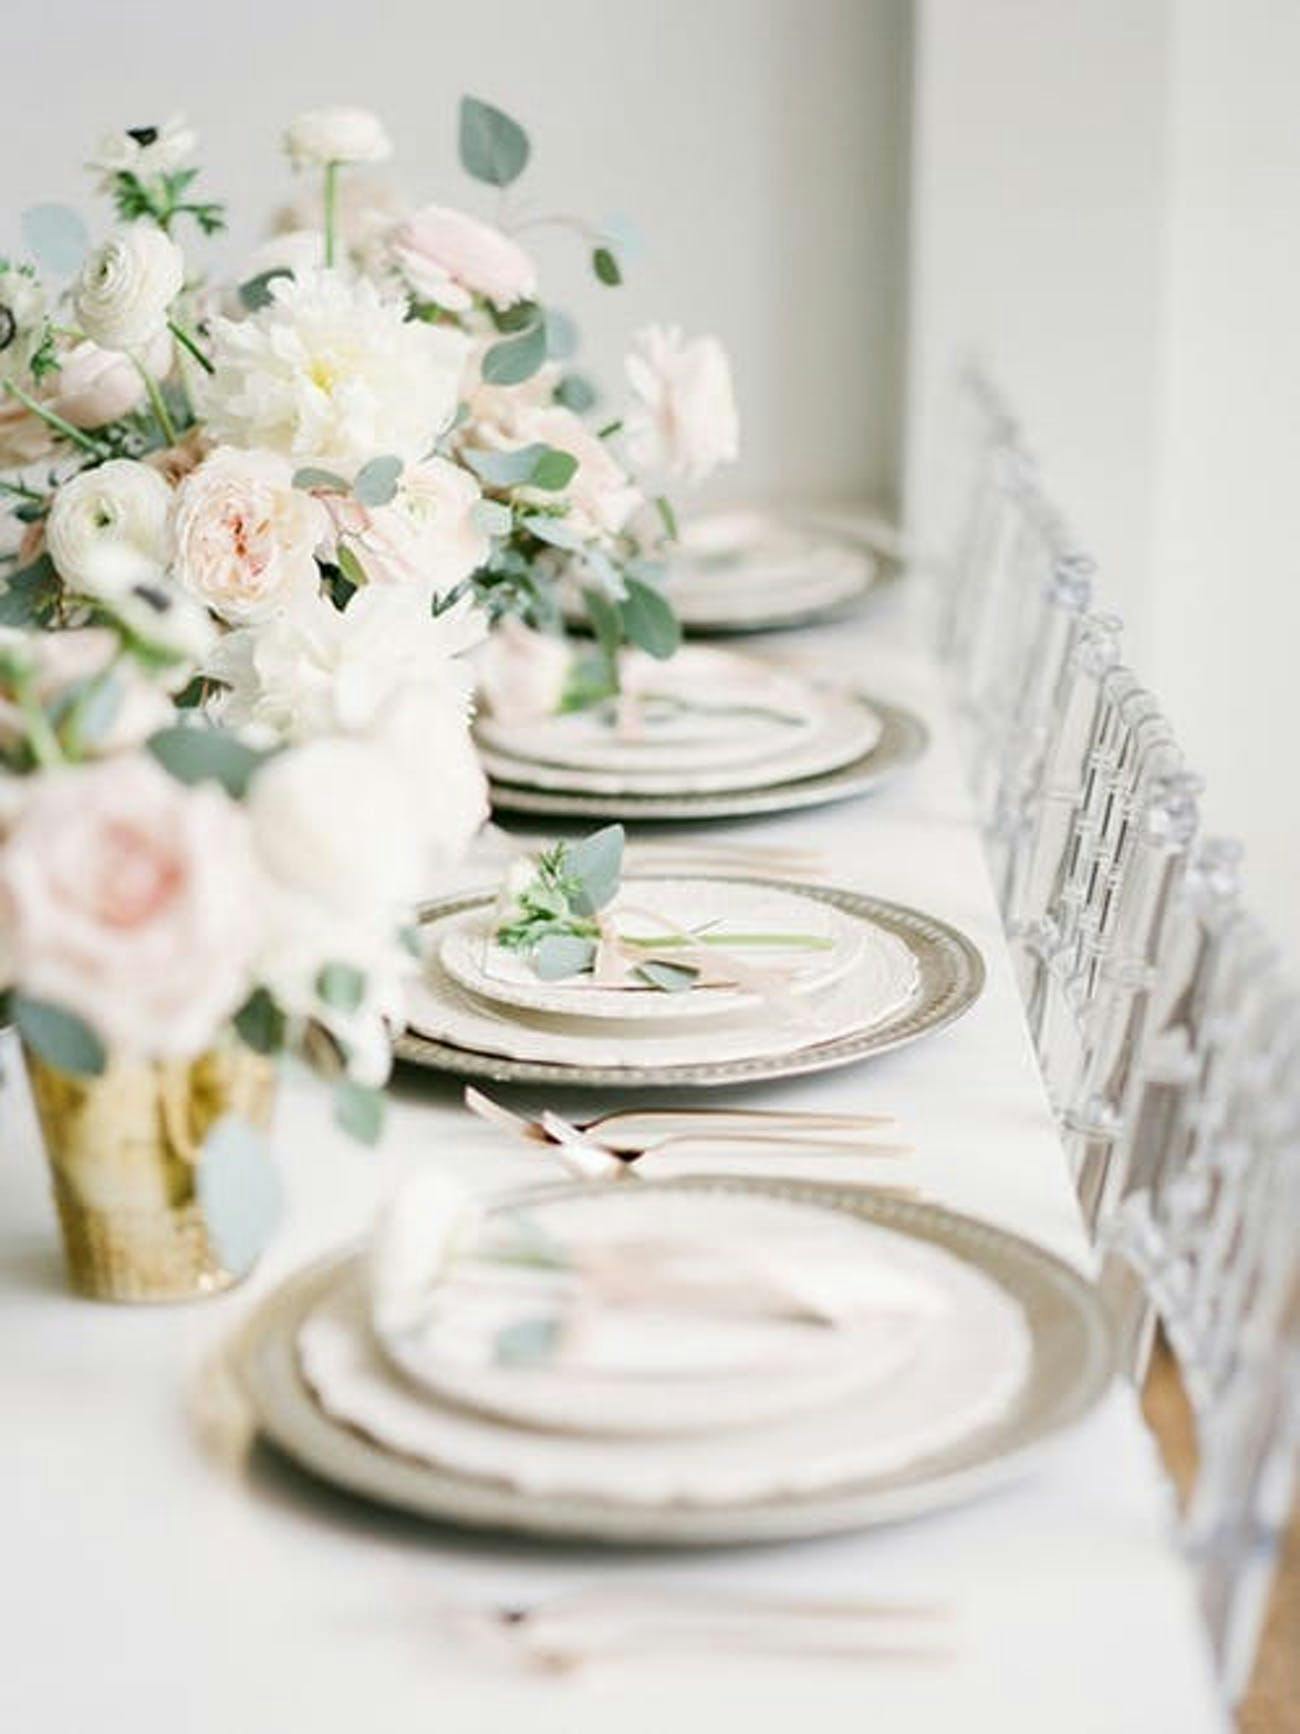 Stunning Table with Floral Centerpiece and White Plates